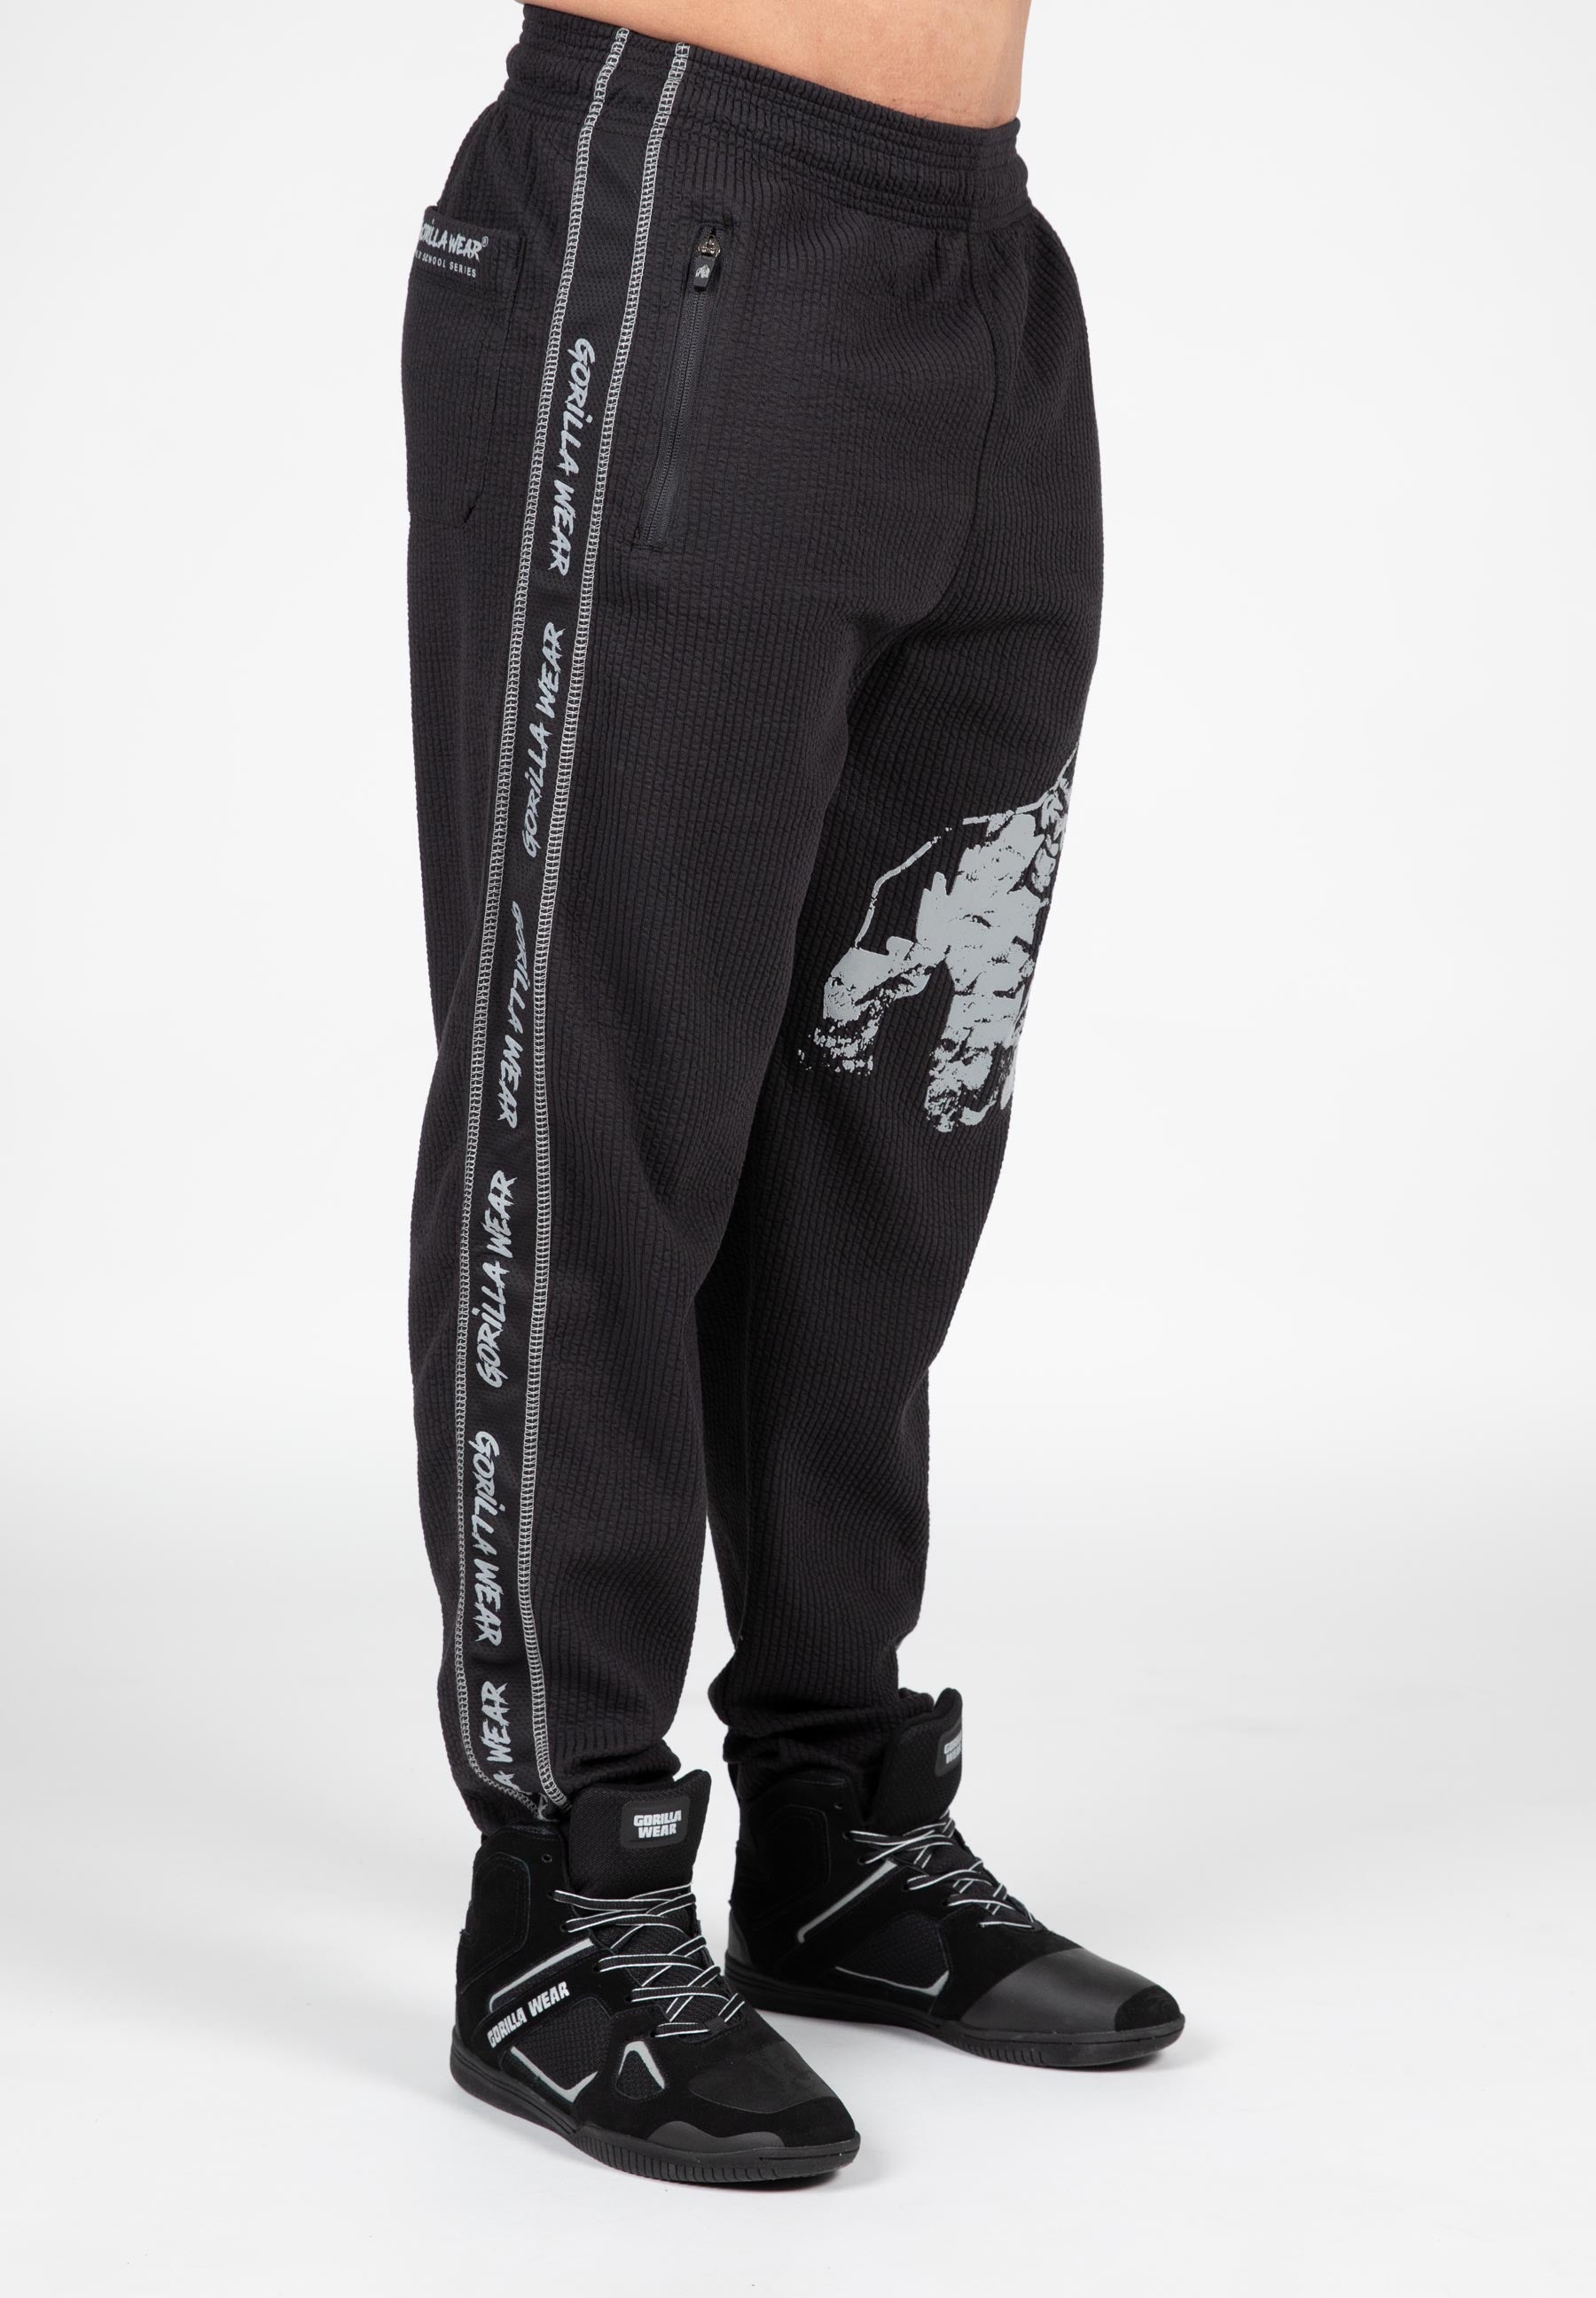 Asiapo China Factory The Gym People Mens Fleece Joggers Pants with